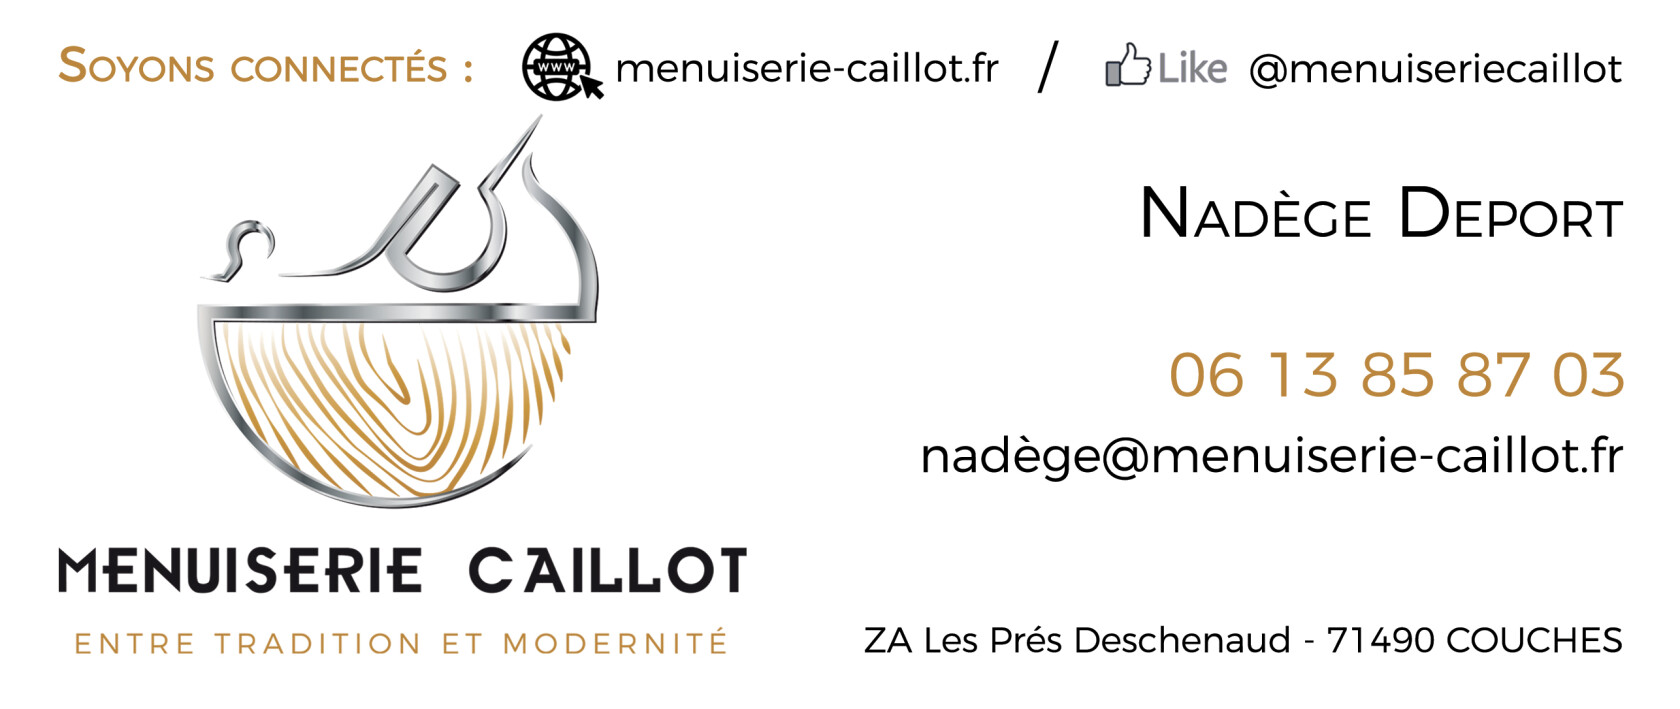 Contact assistante Menuiserie Caillot